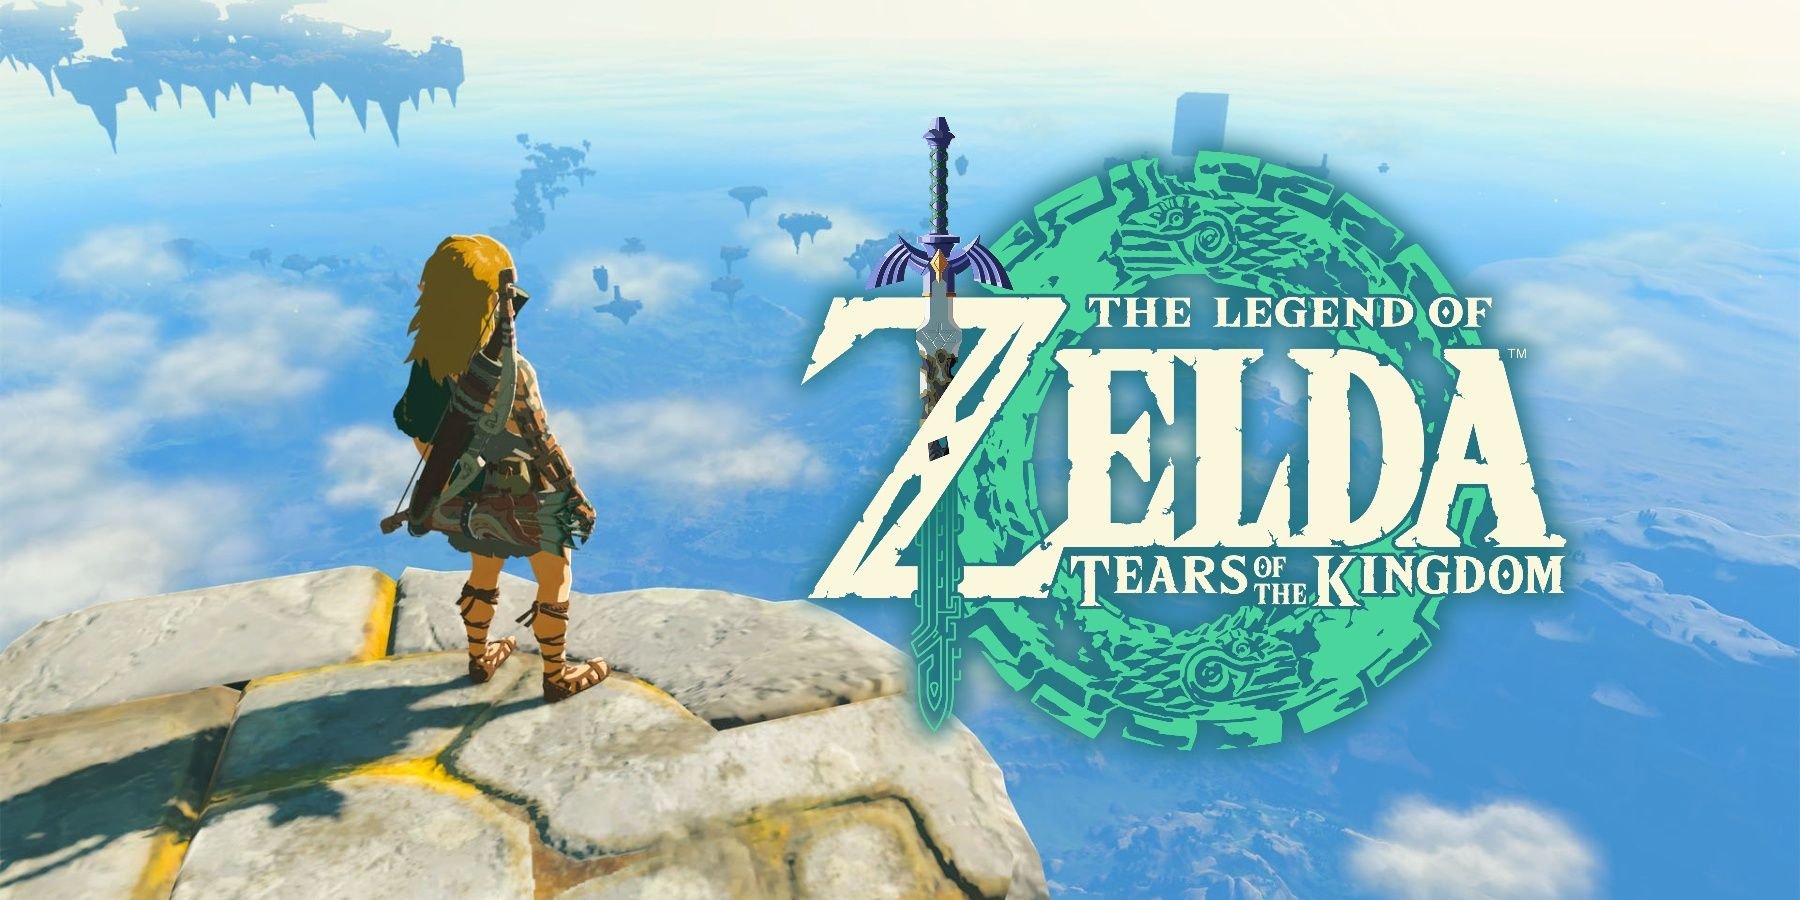 Nintendo Explains Why Zelda: Tears of the Kingdom Will Be Worth Its Higher Price Tag